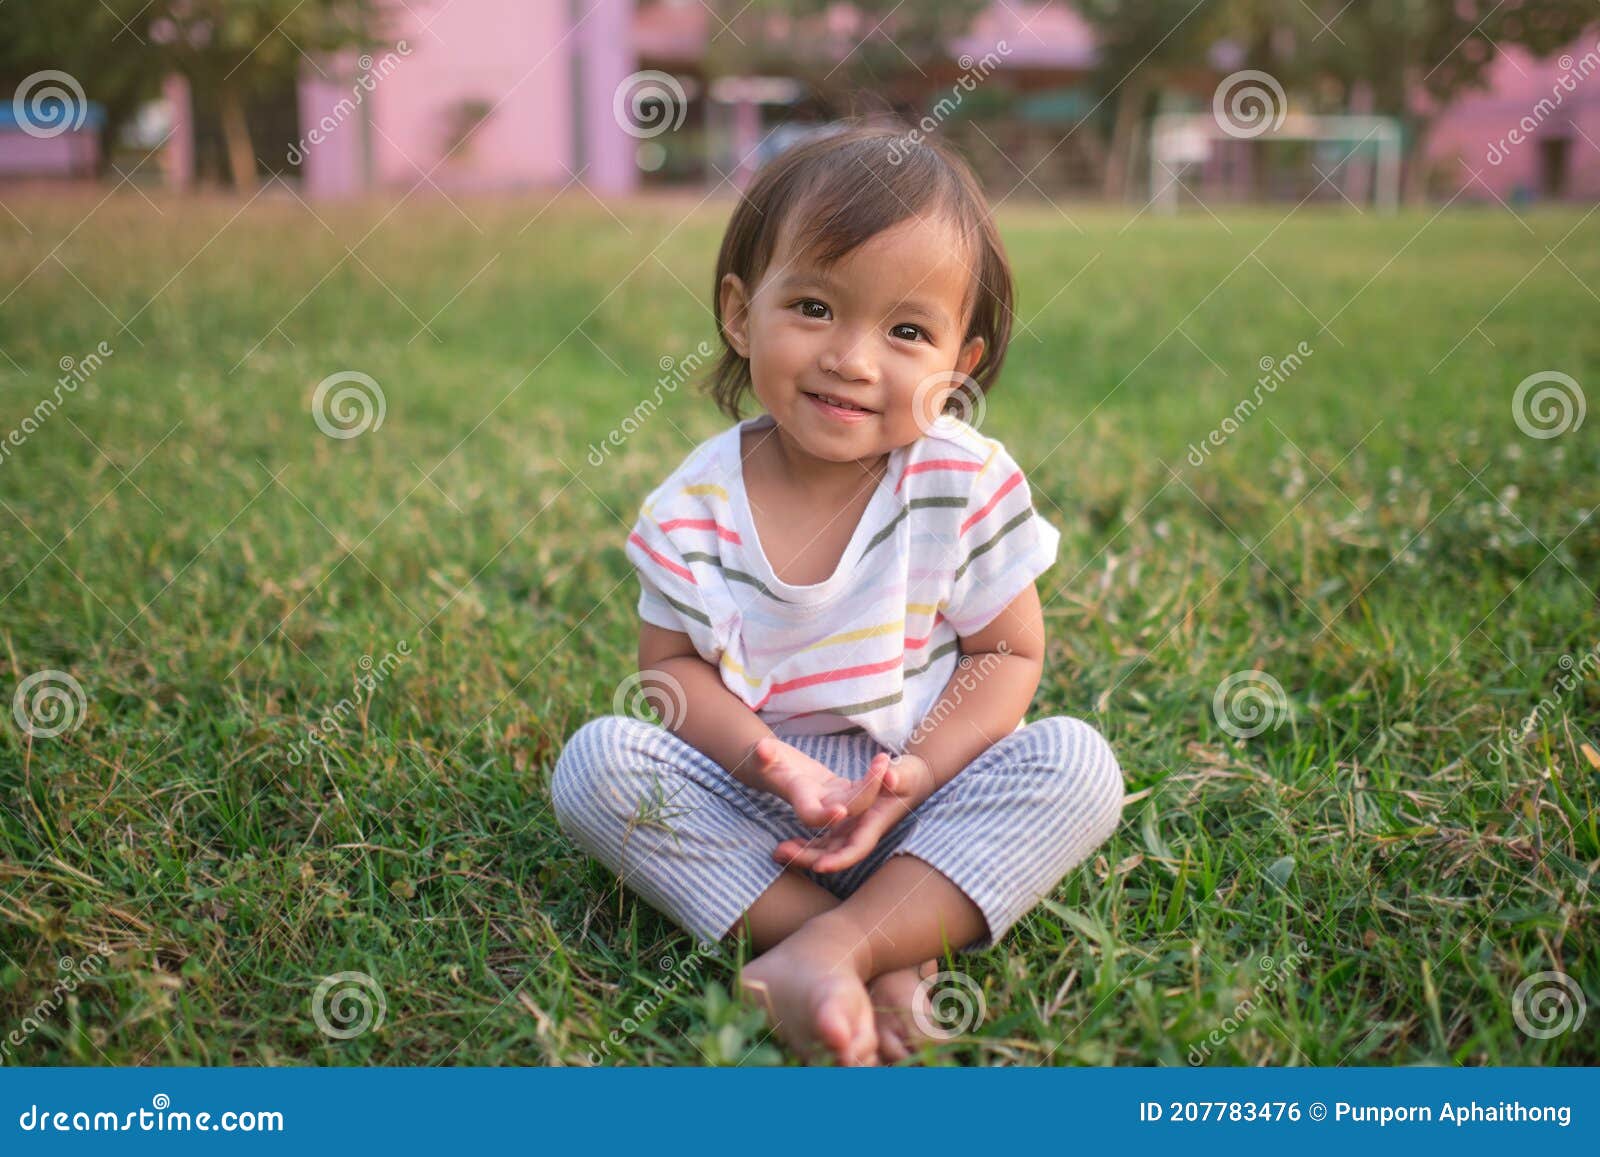 Cute Little Asian 1 - 2 Years Old Toddler Baby Girl Child Smiling ...